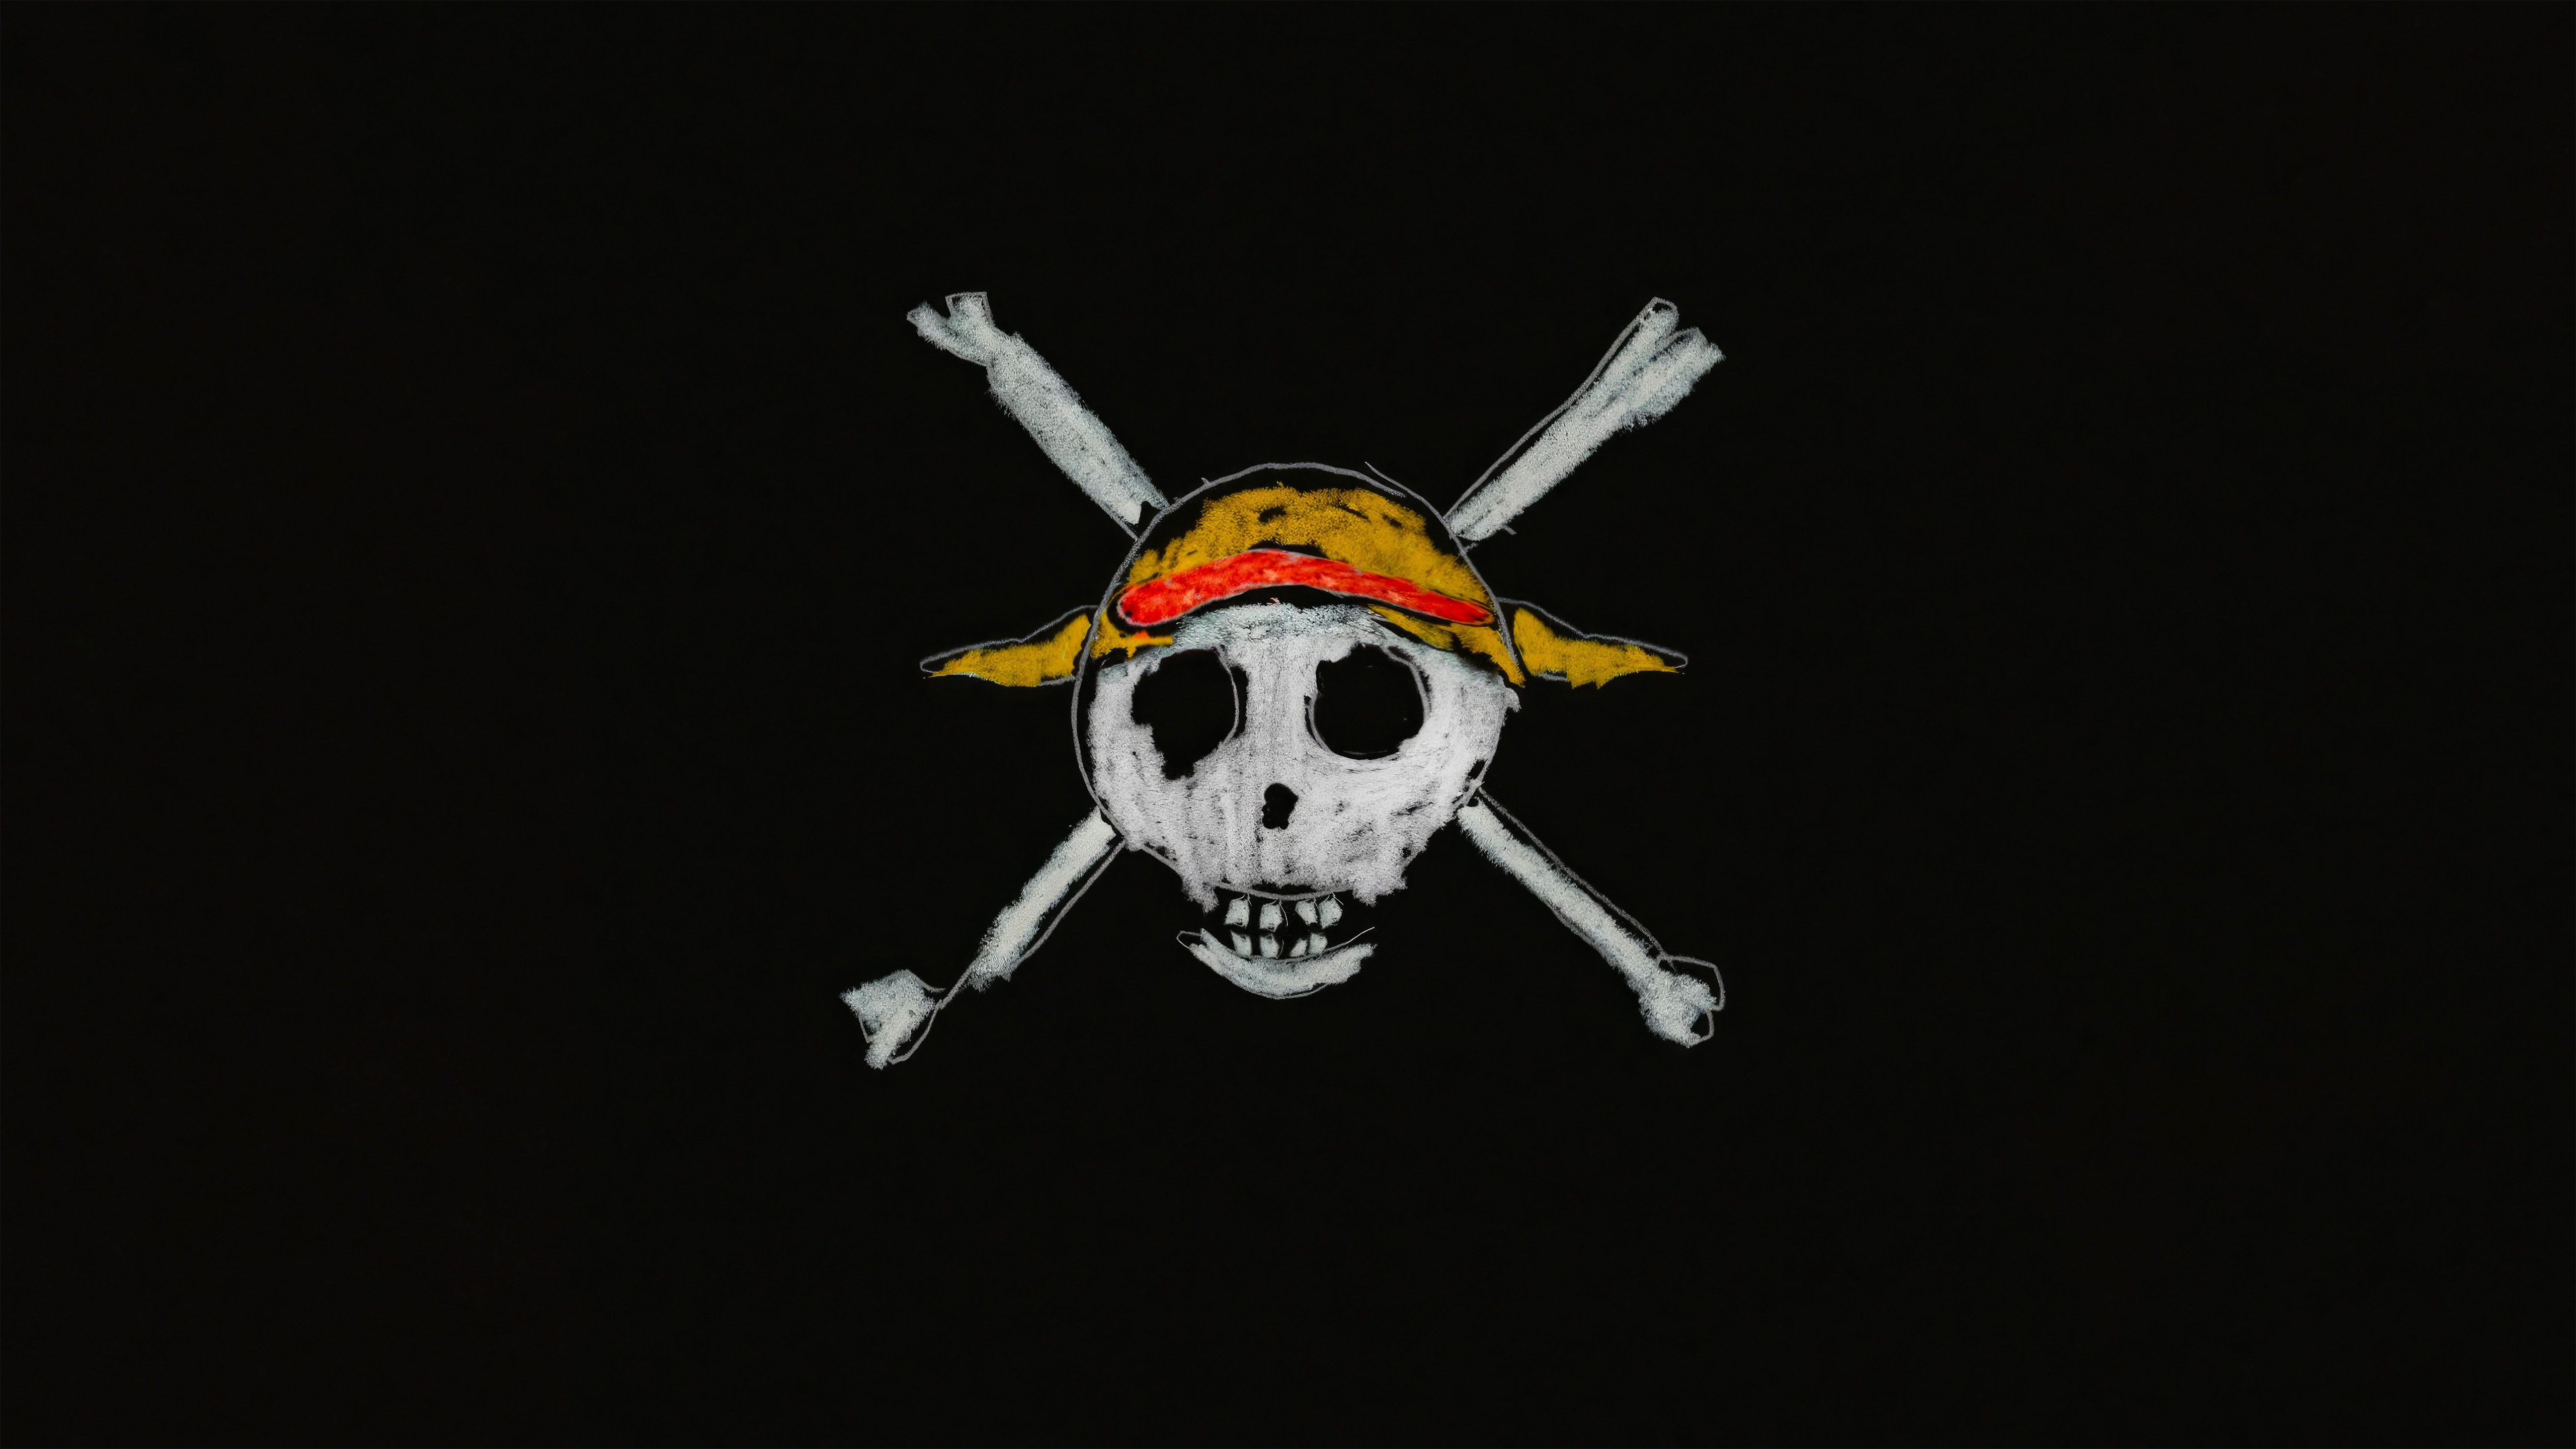 One Piece Skull Wallpapers - Wallpaper Cave